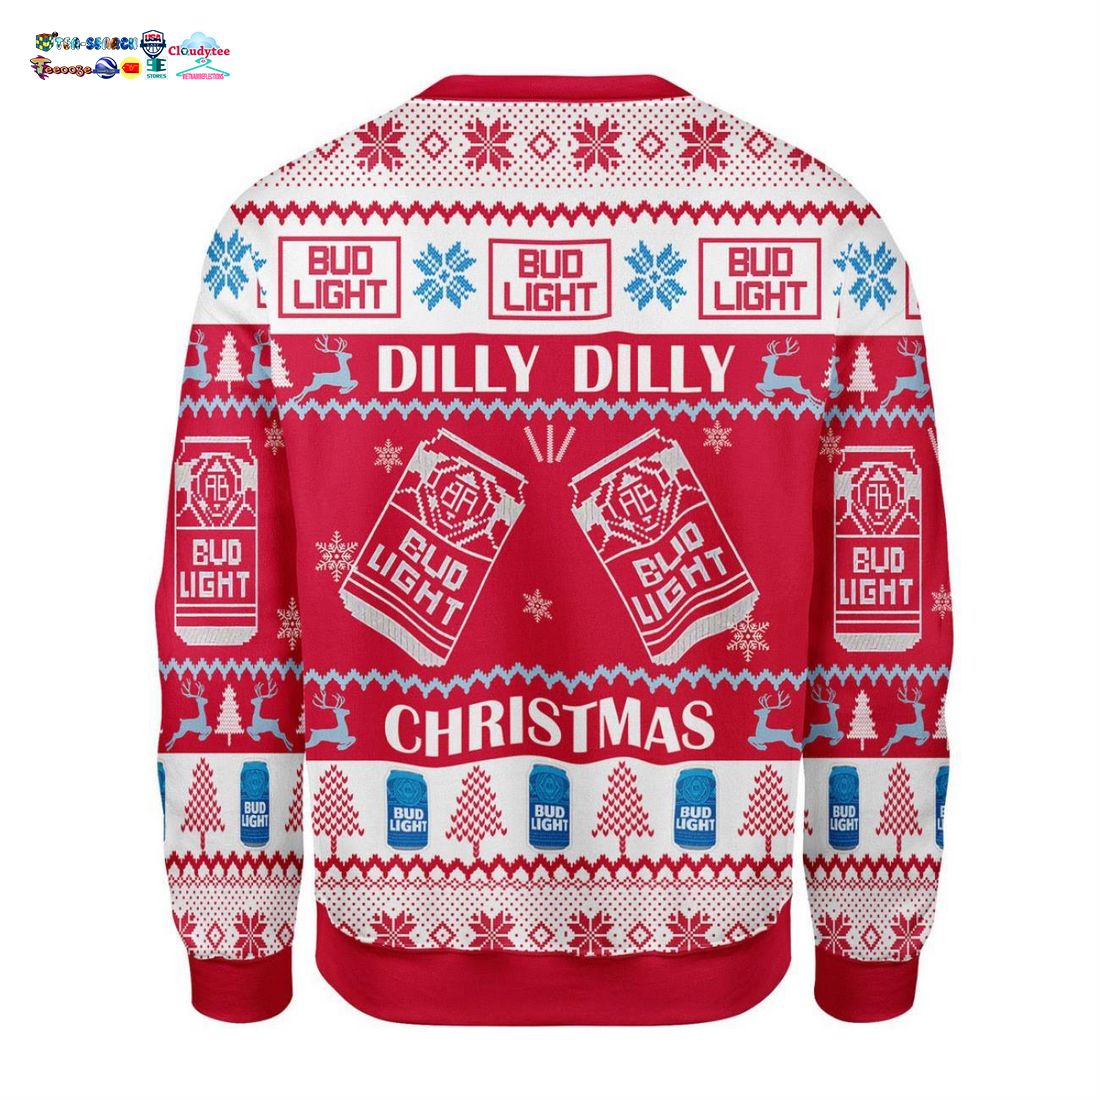 Bud Light Dilly Dilly Christmas Ugly Christmas Sweater